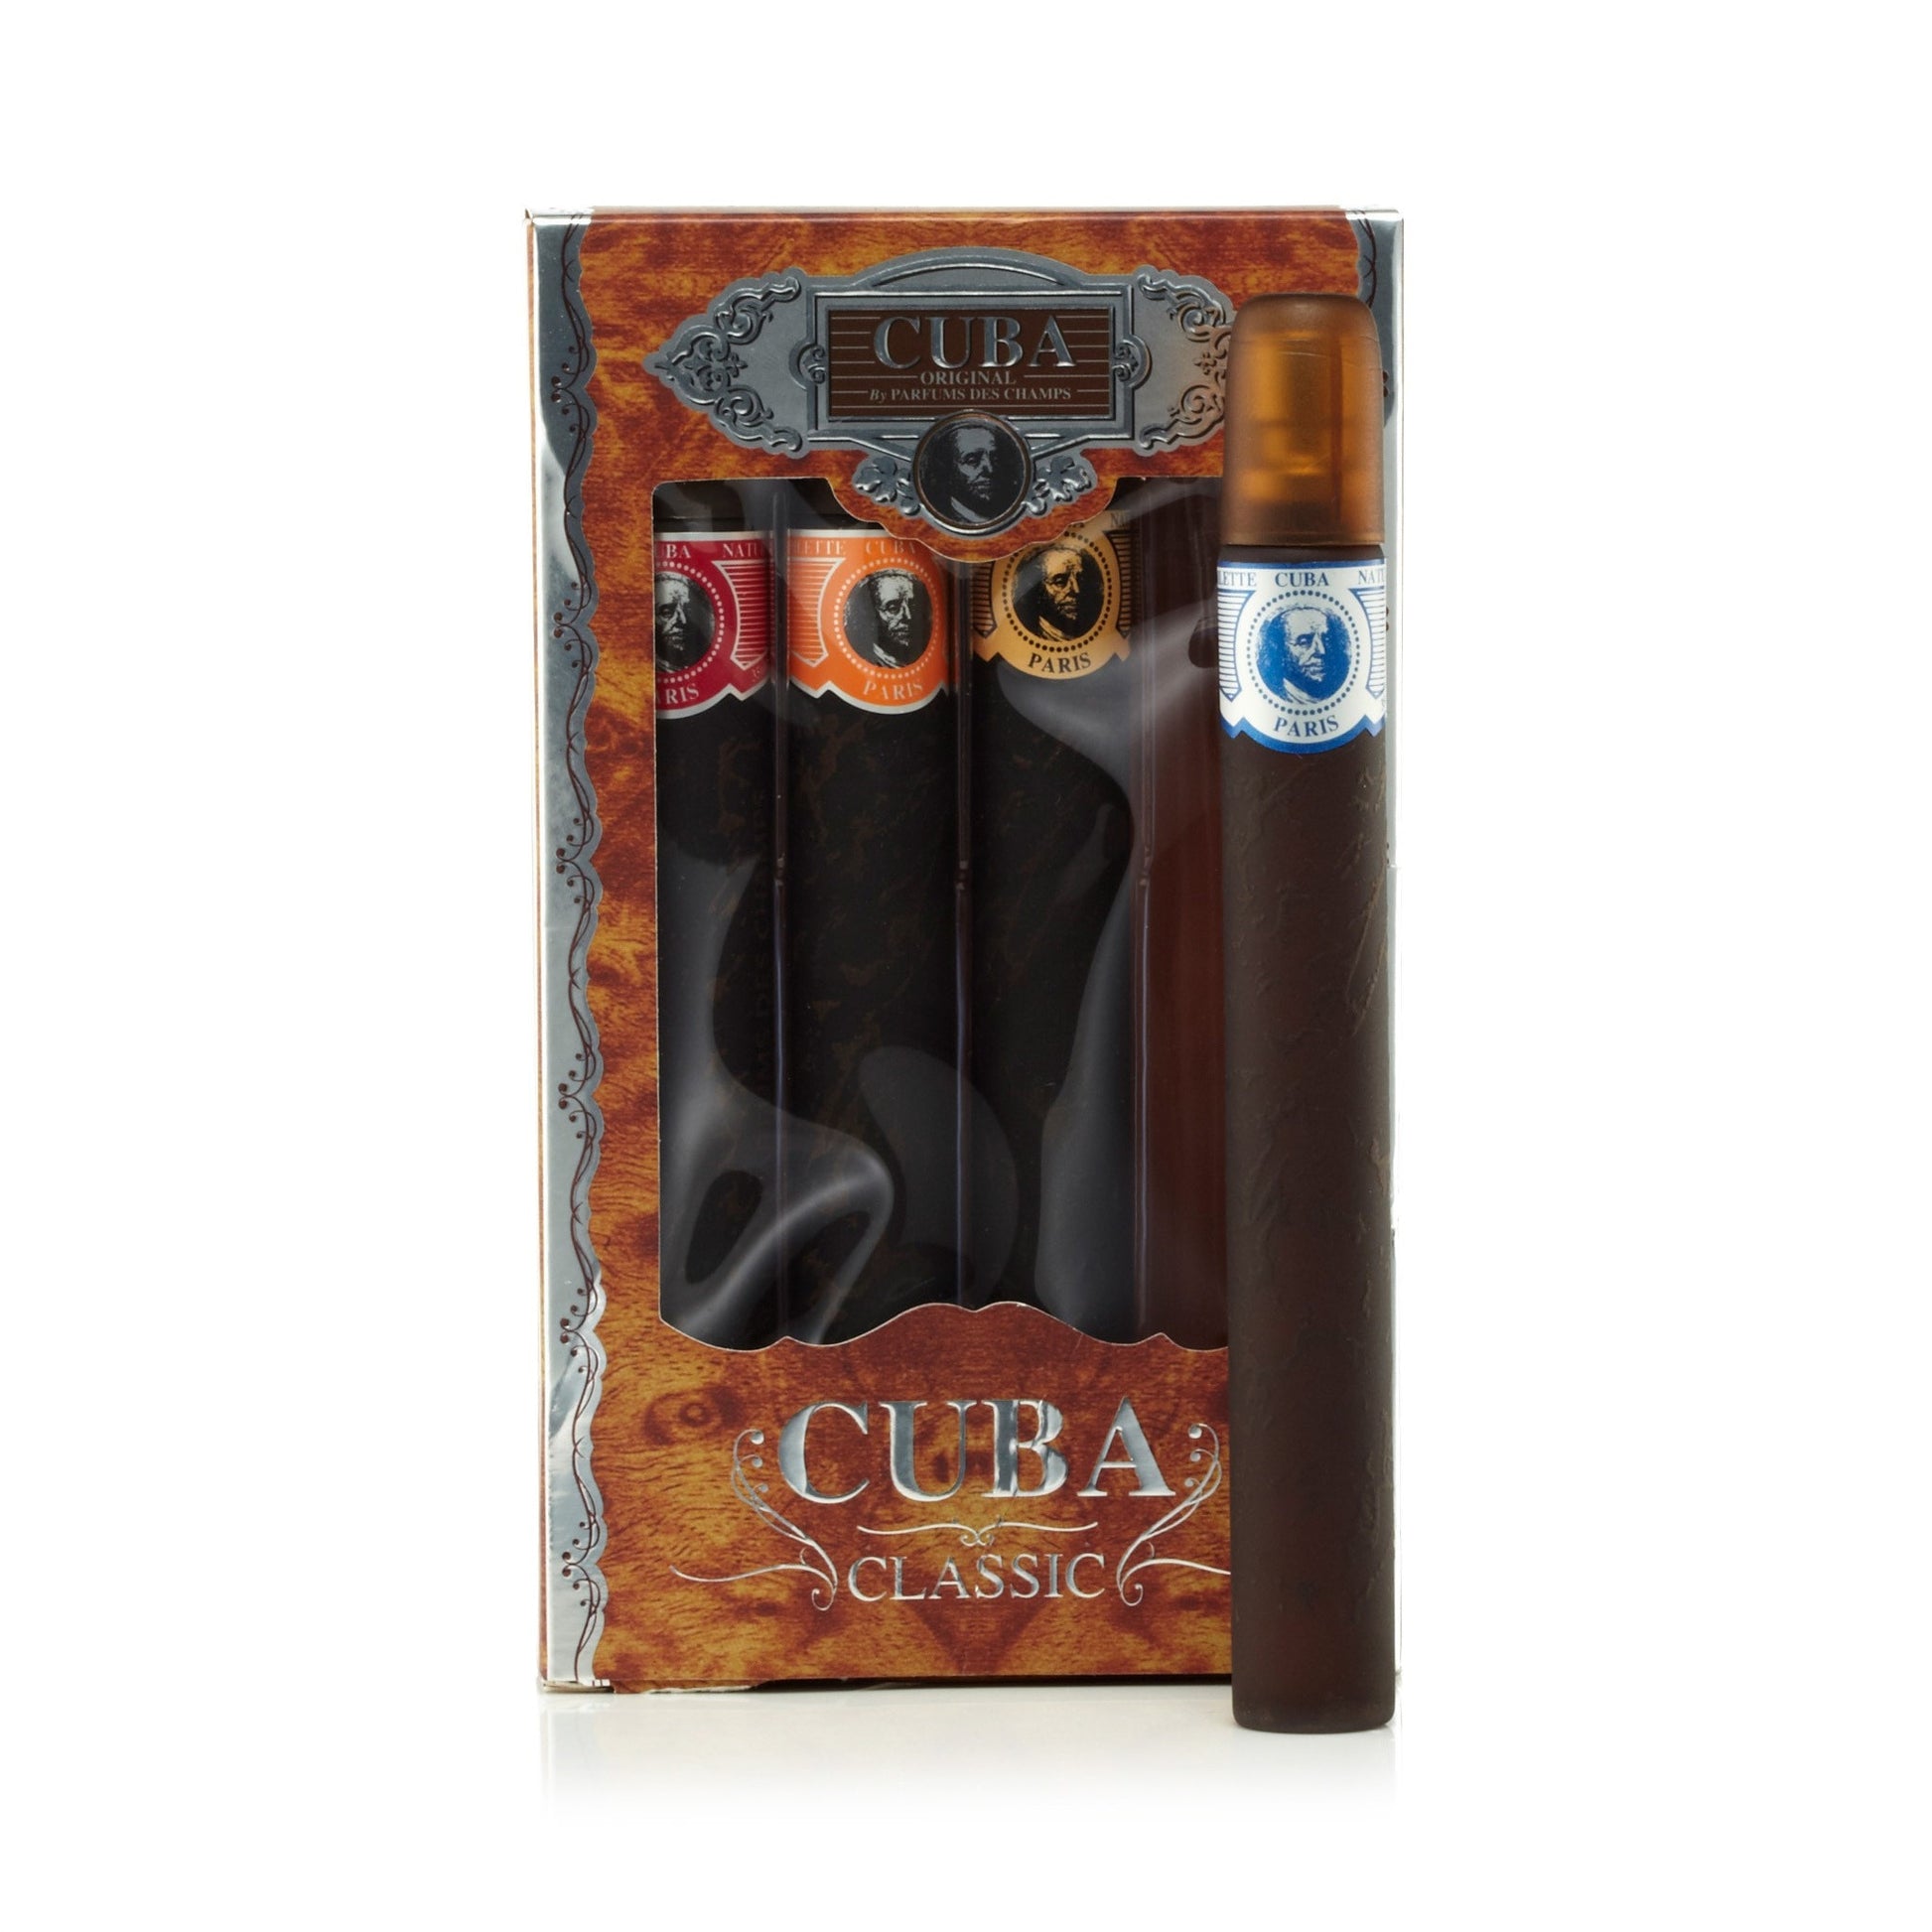 Blue Gold Orange Red Gift Set for Men by Cuba 1.17 oz. Each Click to open in modal